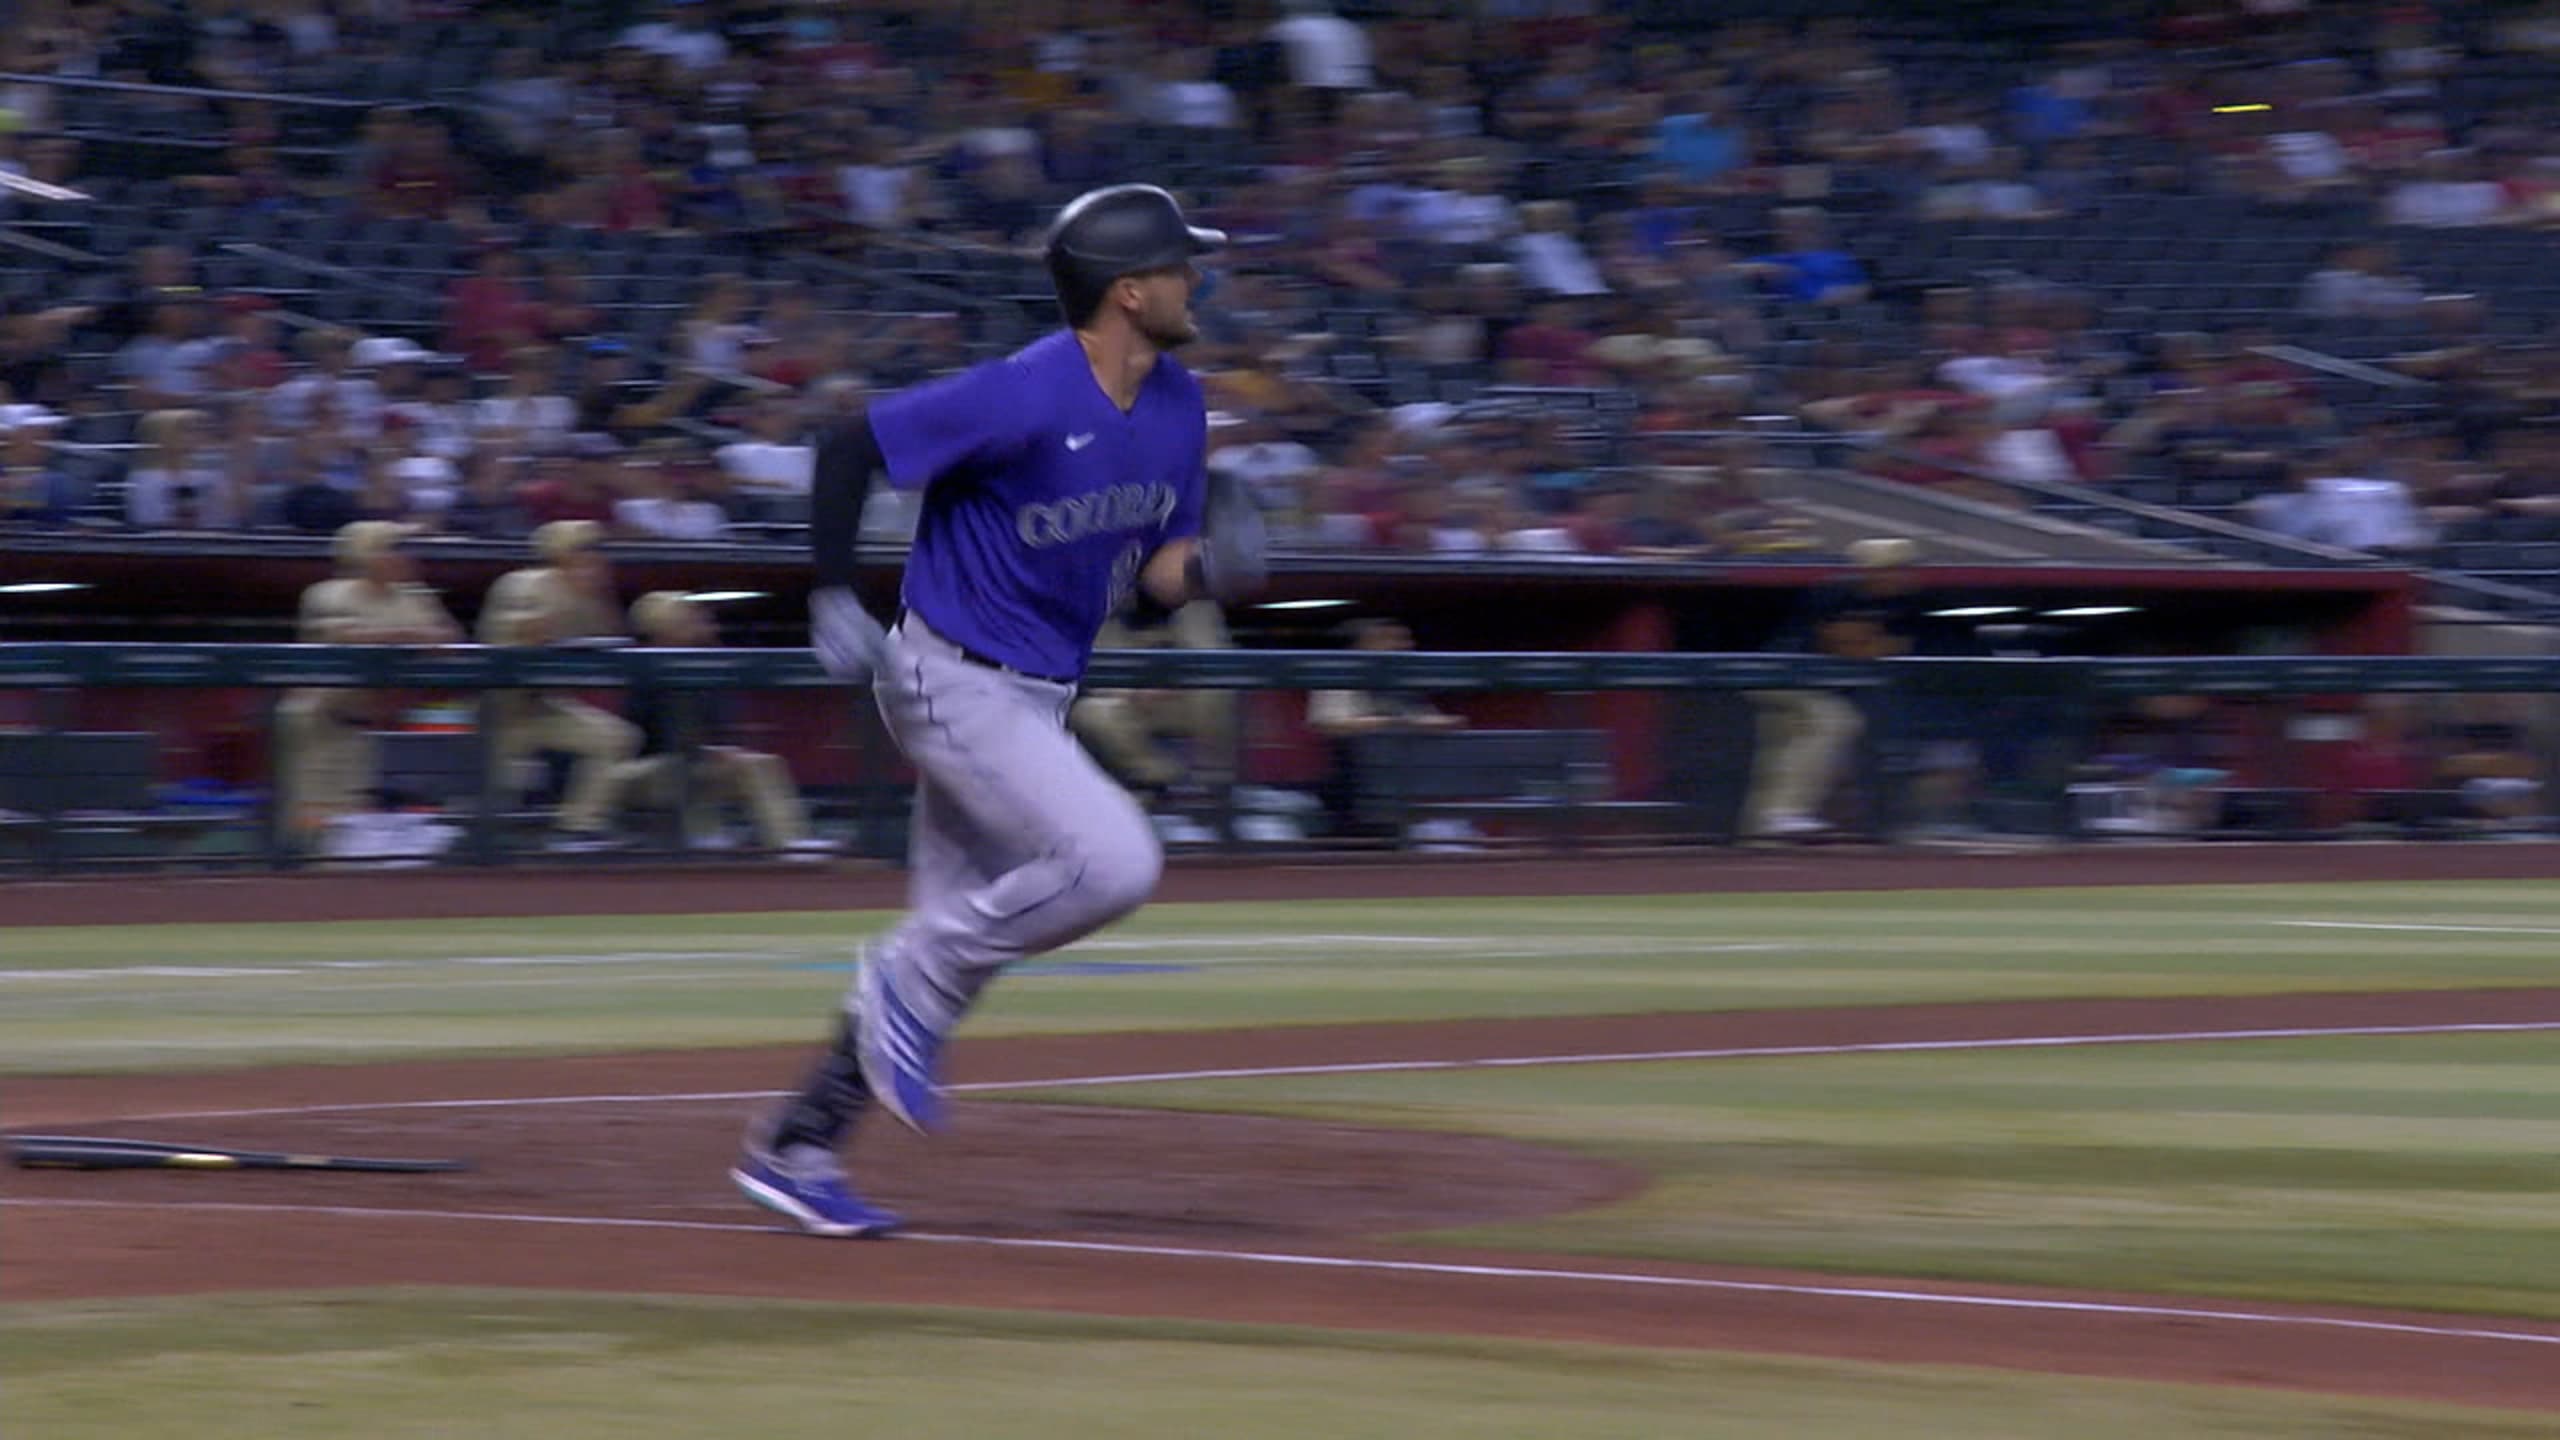 Kris Bryant homers for first time with Rockies to snap career